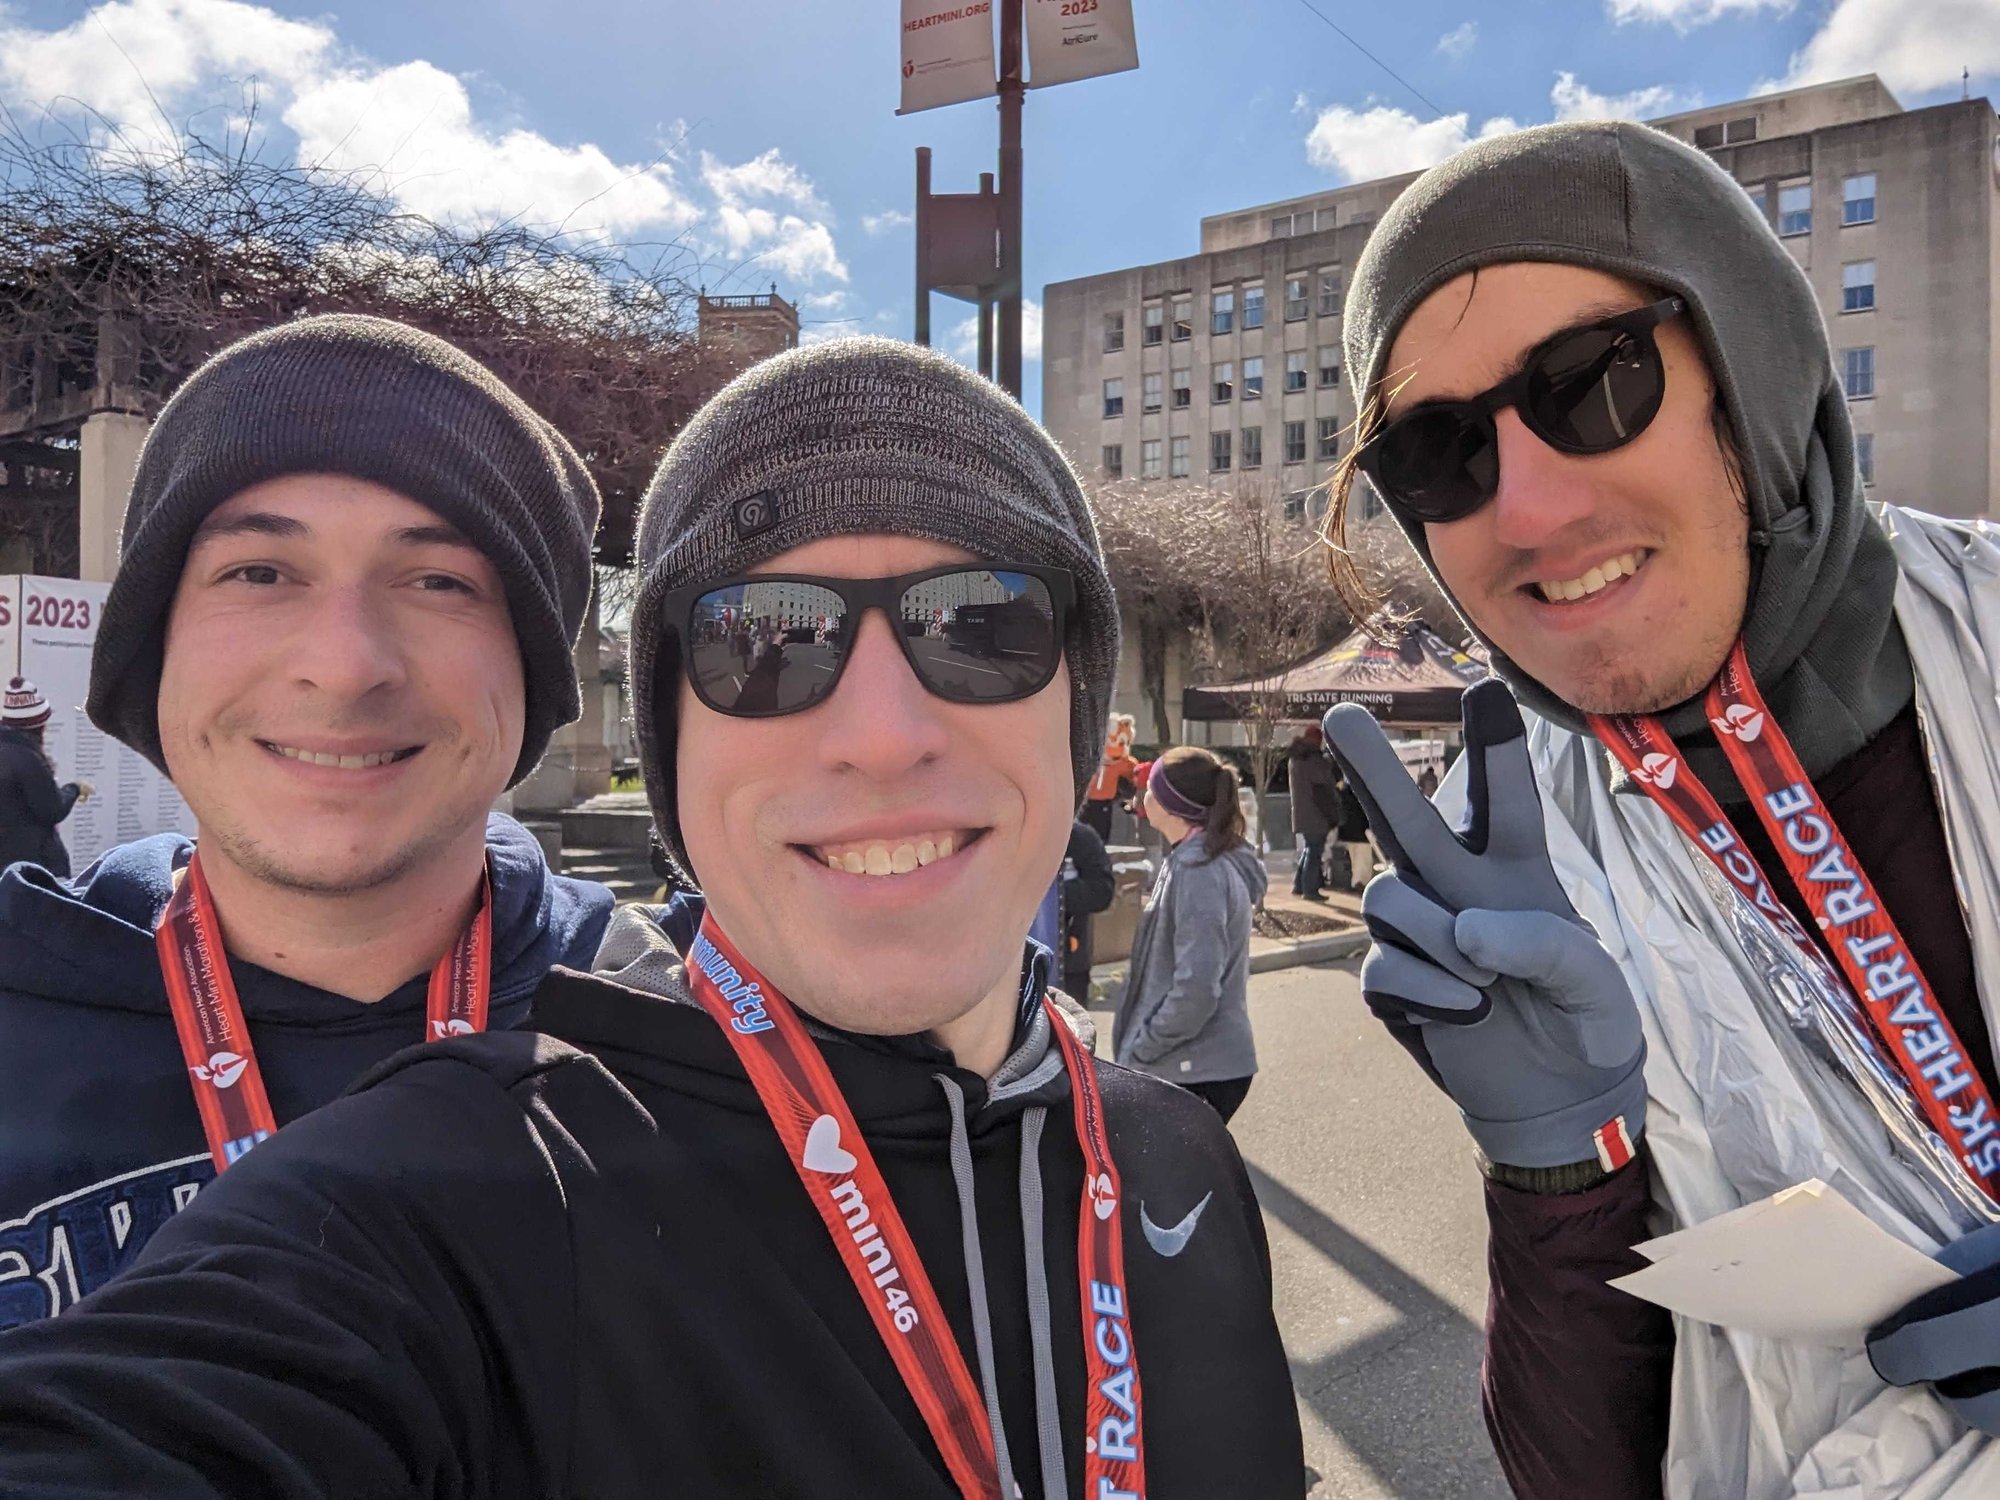 A few of our team members attending the 5k Heart Race